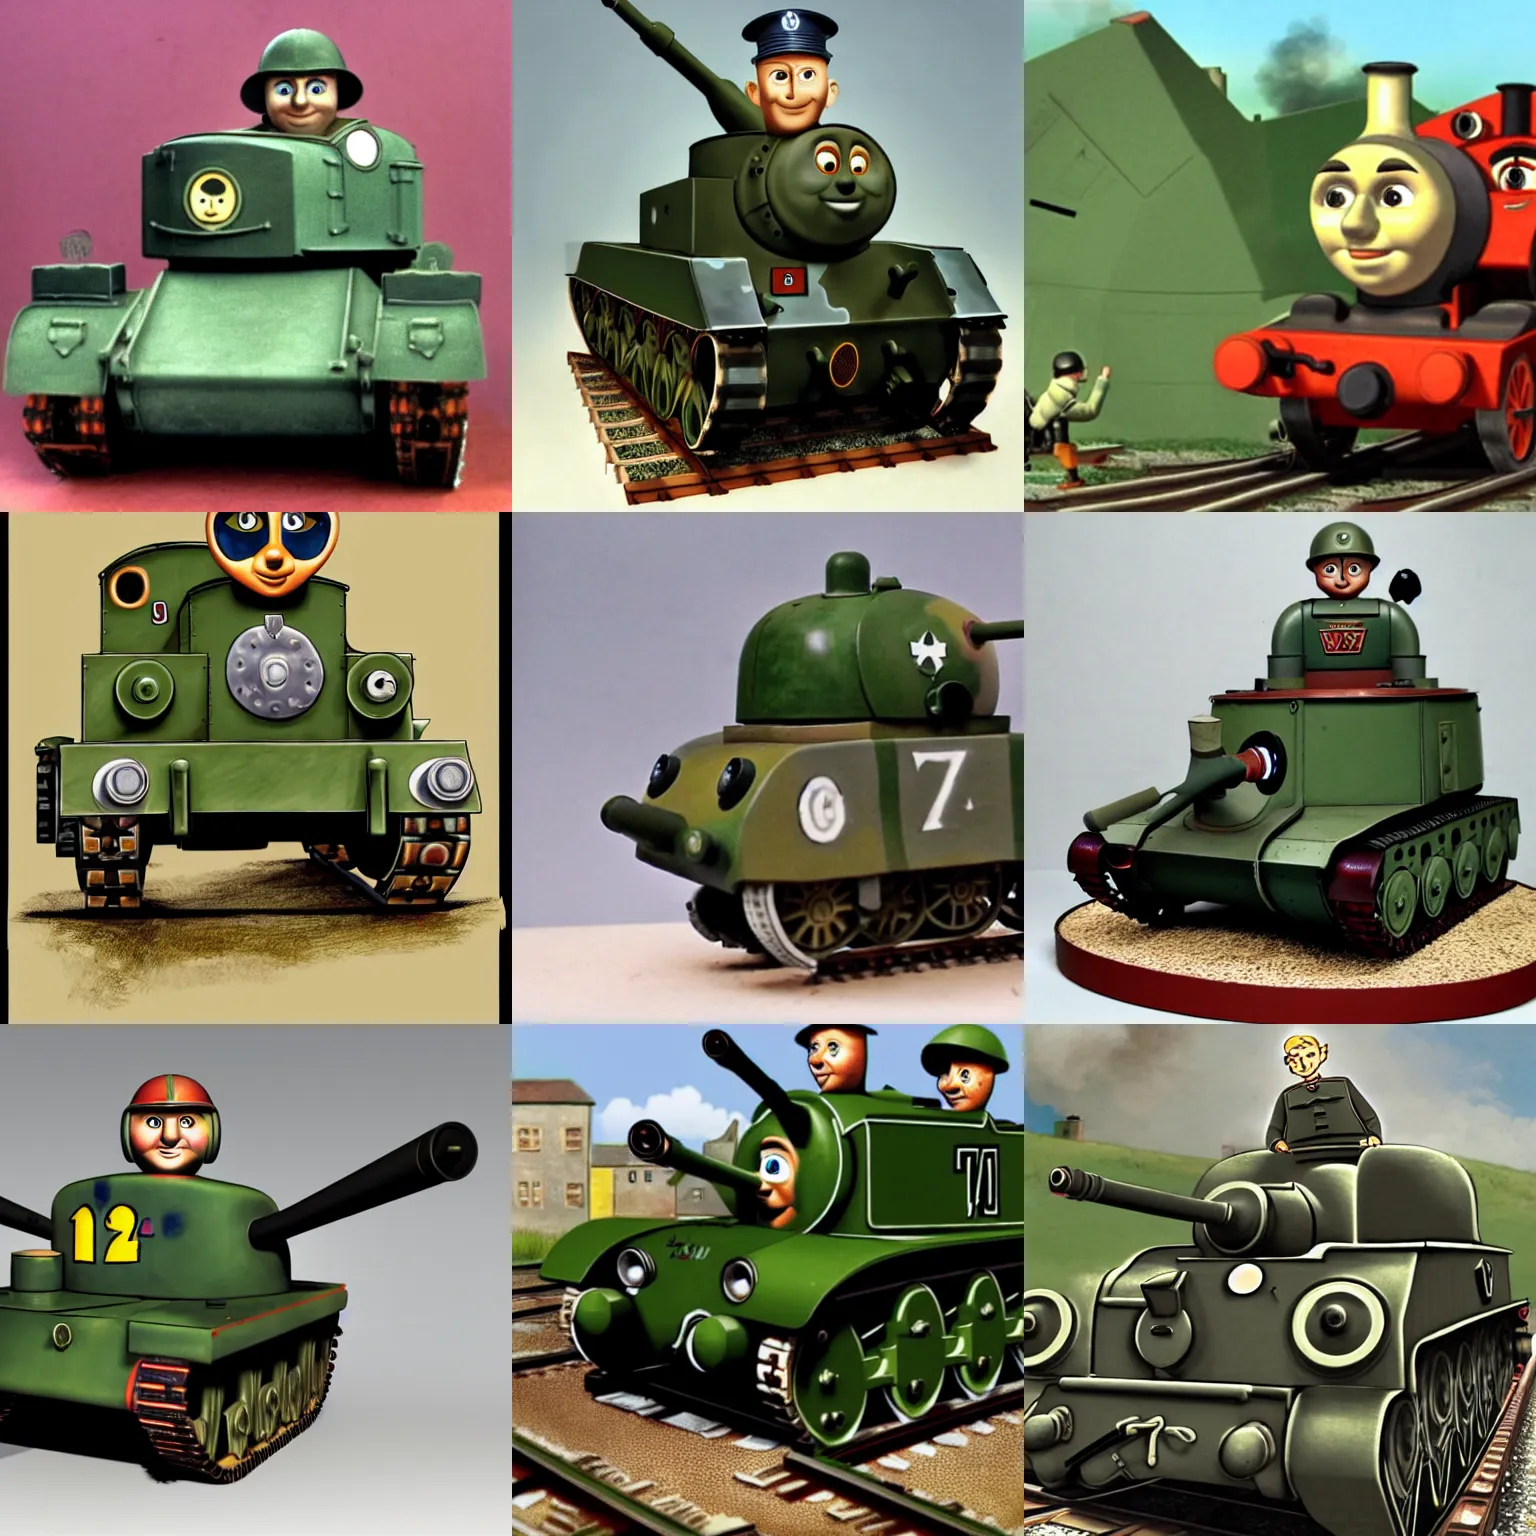 Prompt: a panzer world war ii tank anthropomorphised with a face, by wilbert awdry in the art style of thomas the tank engine